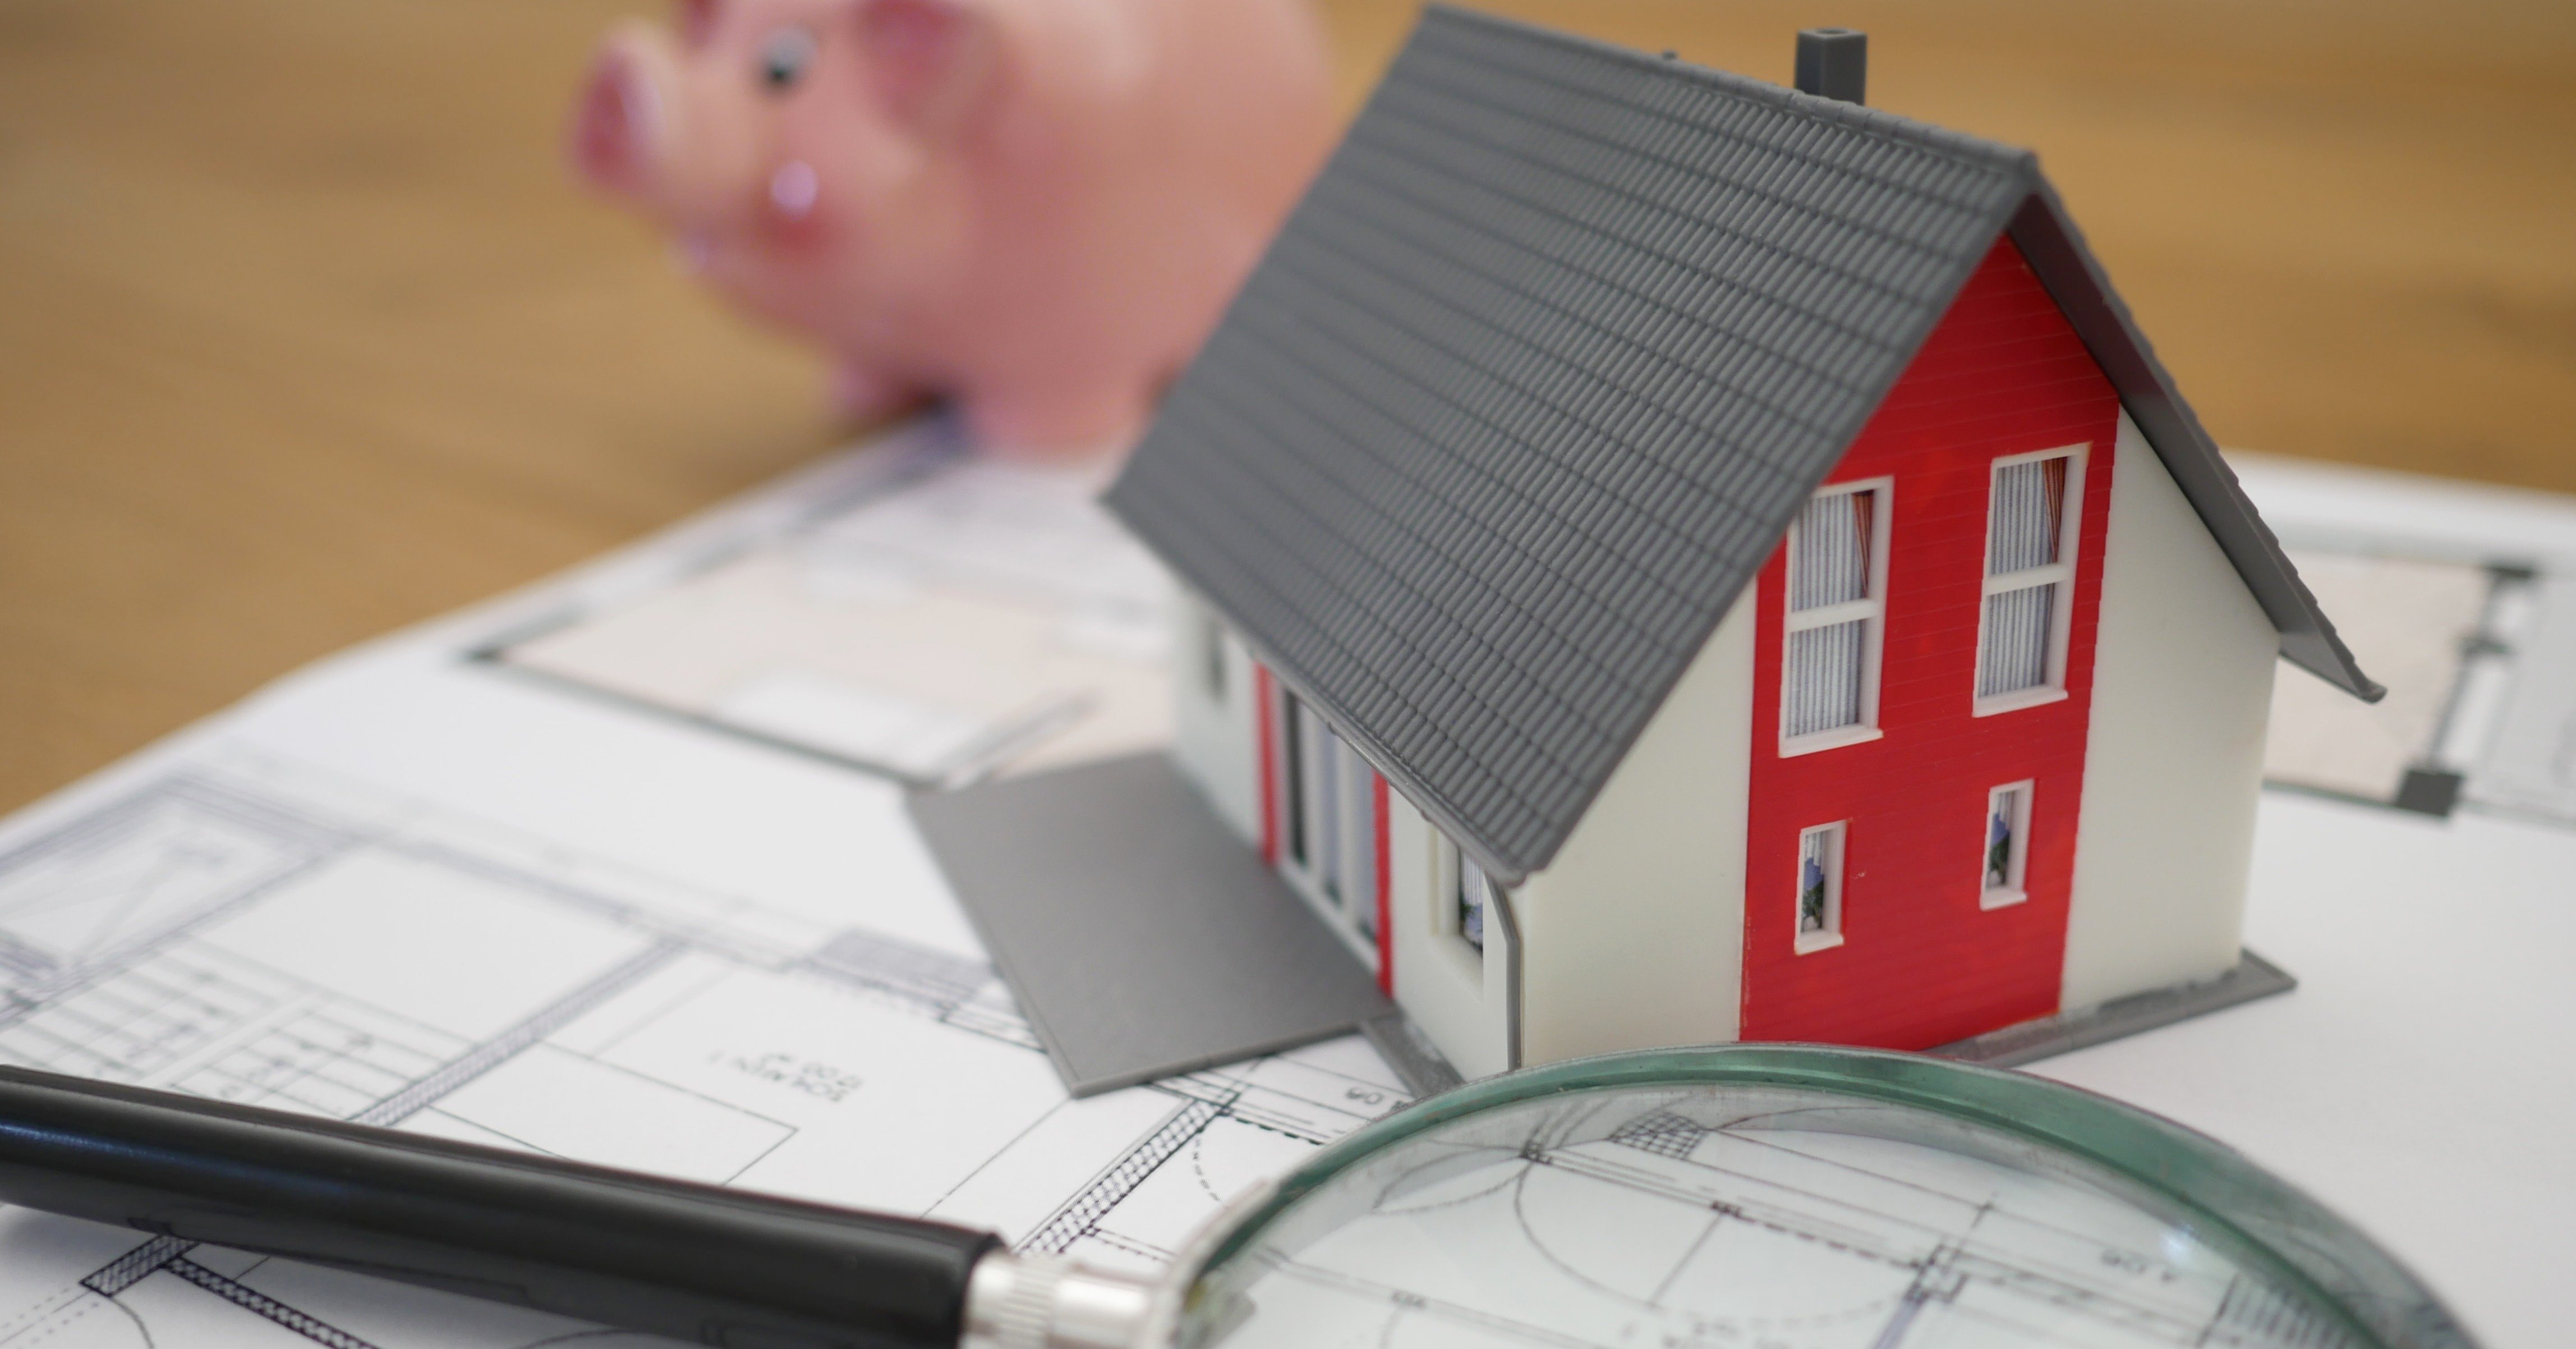 a toy house, a piggy bank, and a magnifying glass sitting on top of building plans